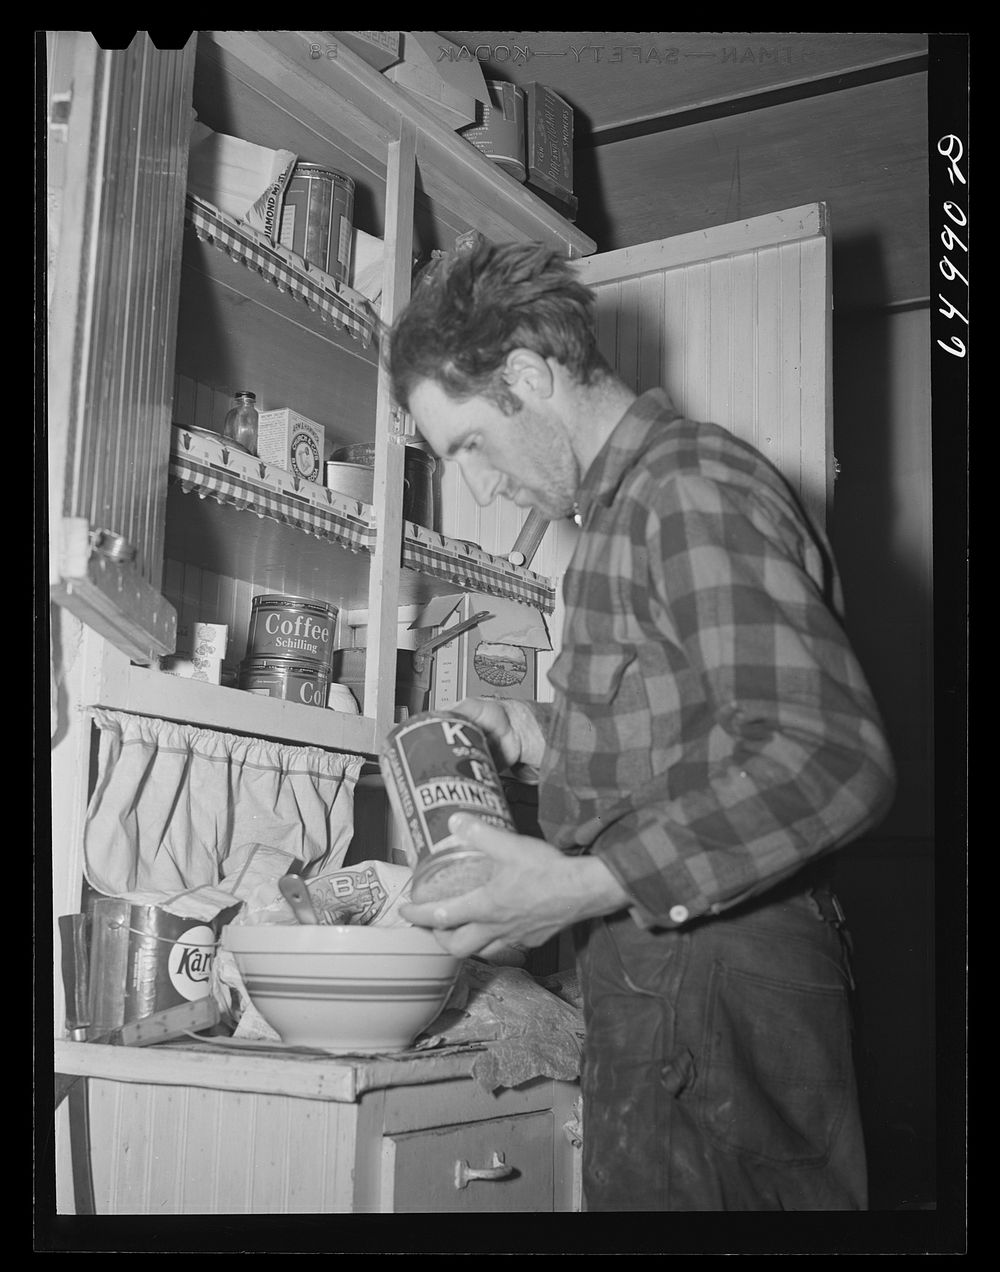 Garfield County, Montana. Sheepherder making biscuits in his winter quarters. Sourced from the Library of Congress.